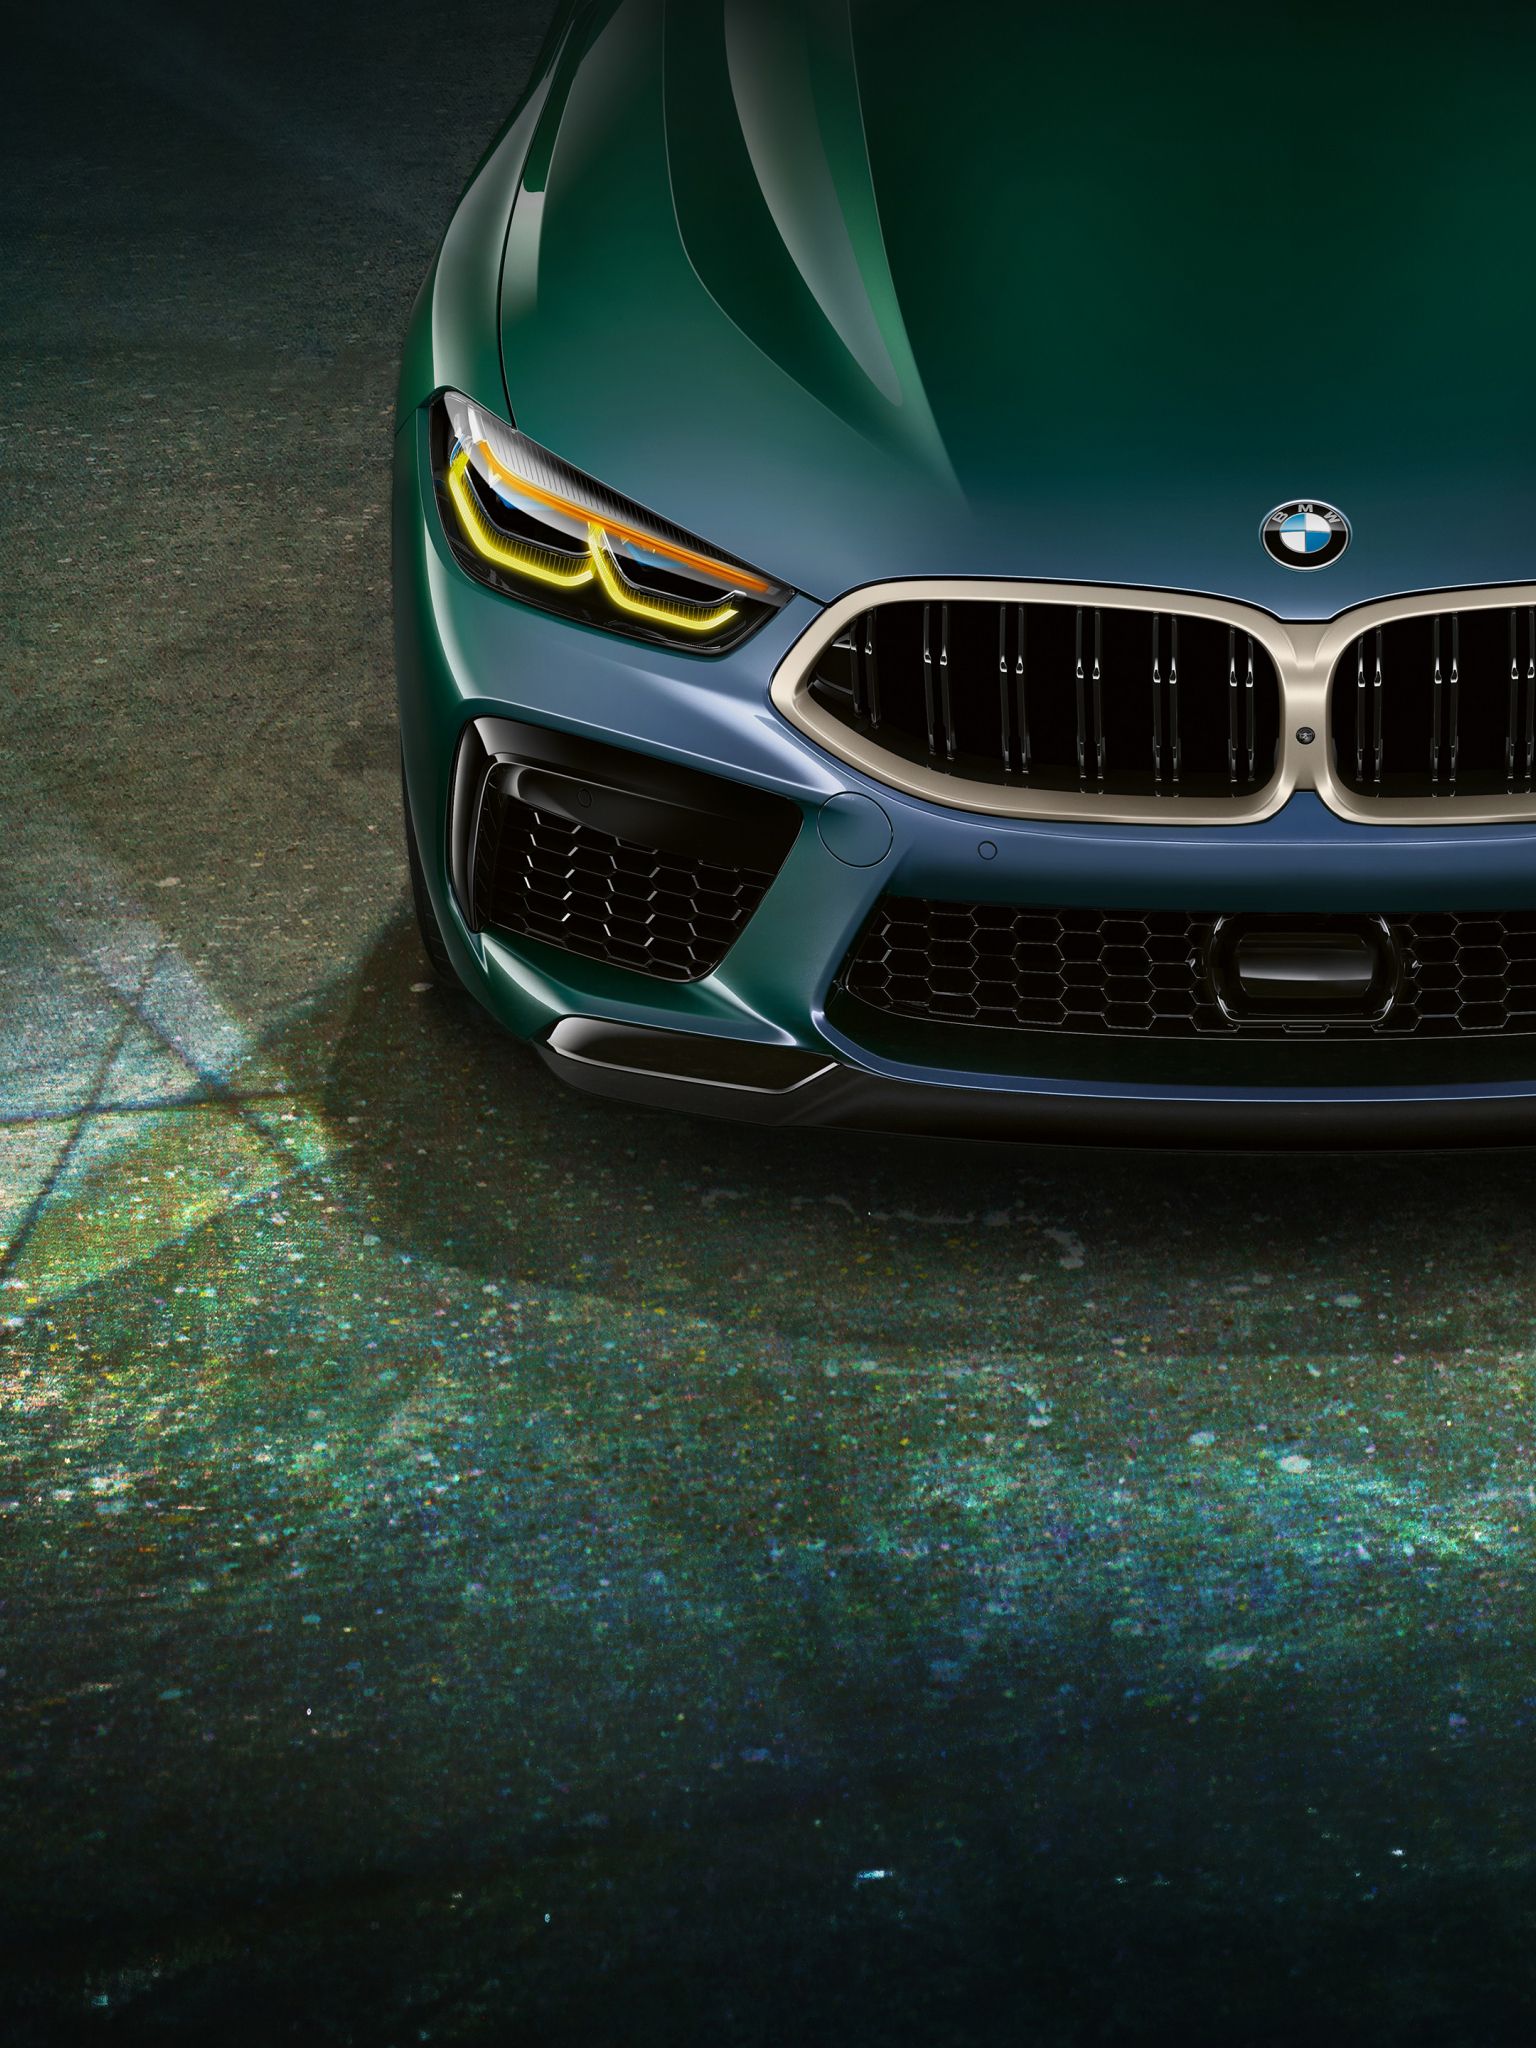 Bmw M8 Iphone Wallpapers - Wallpaper Cave